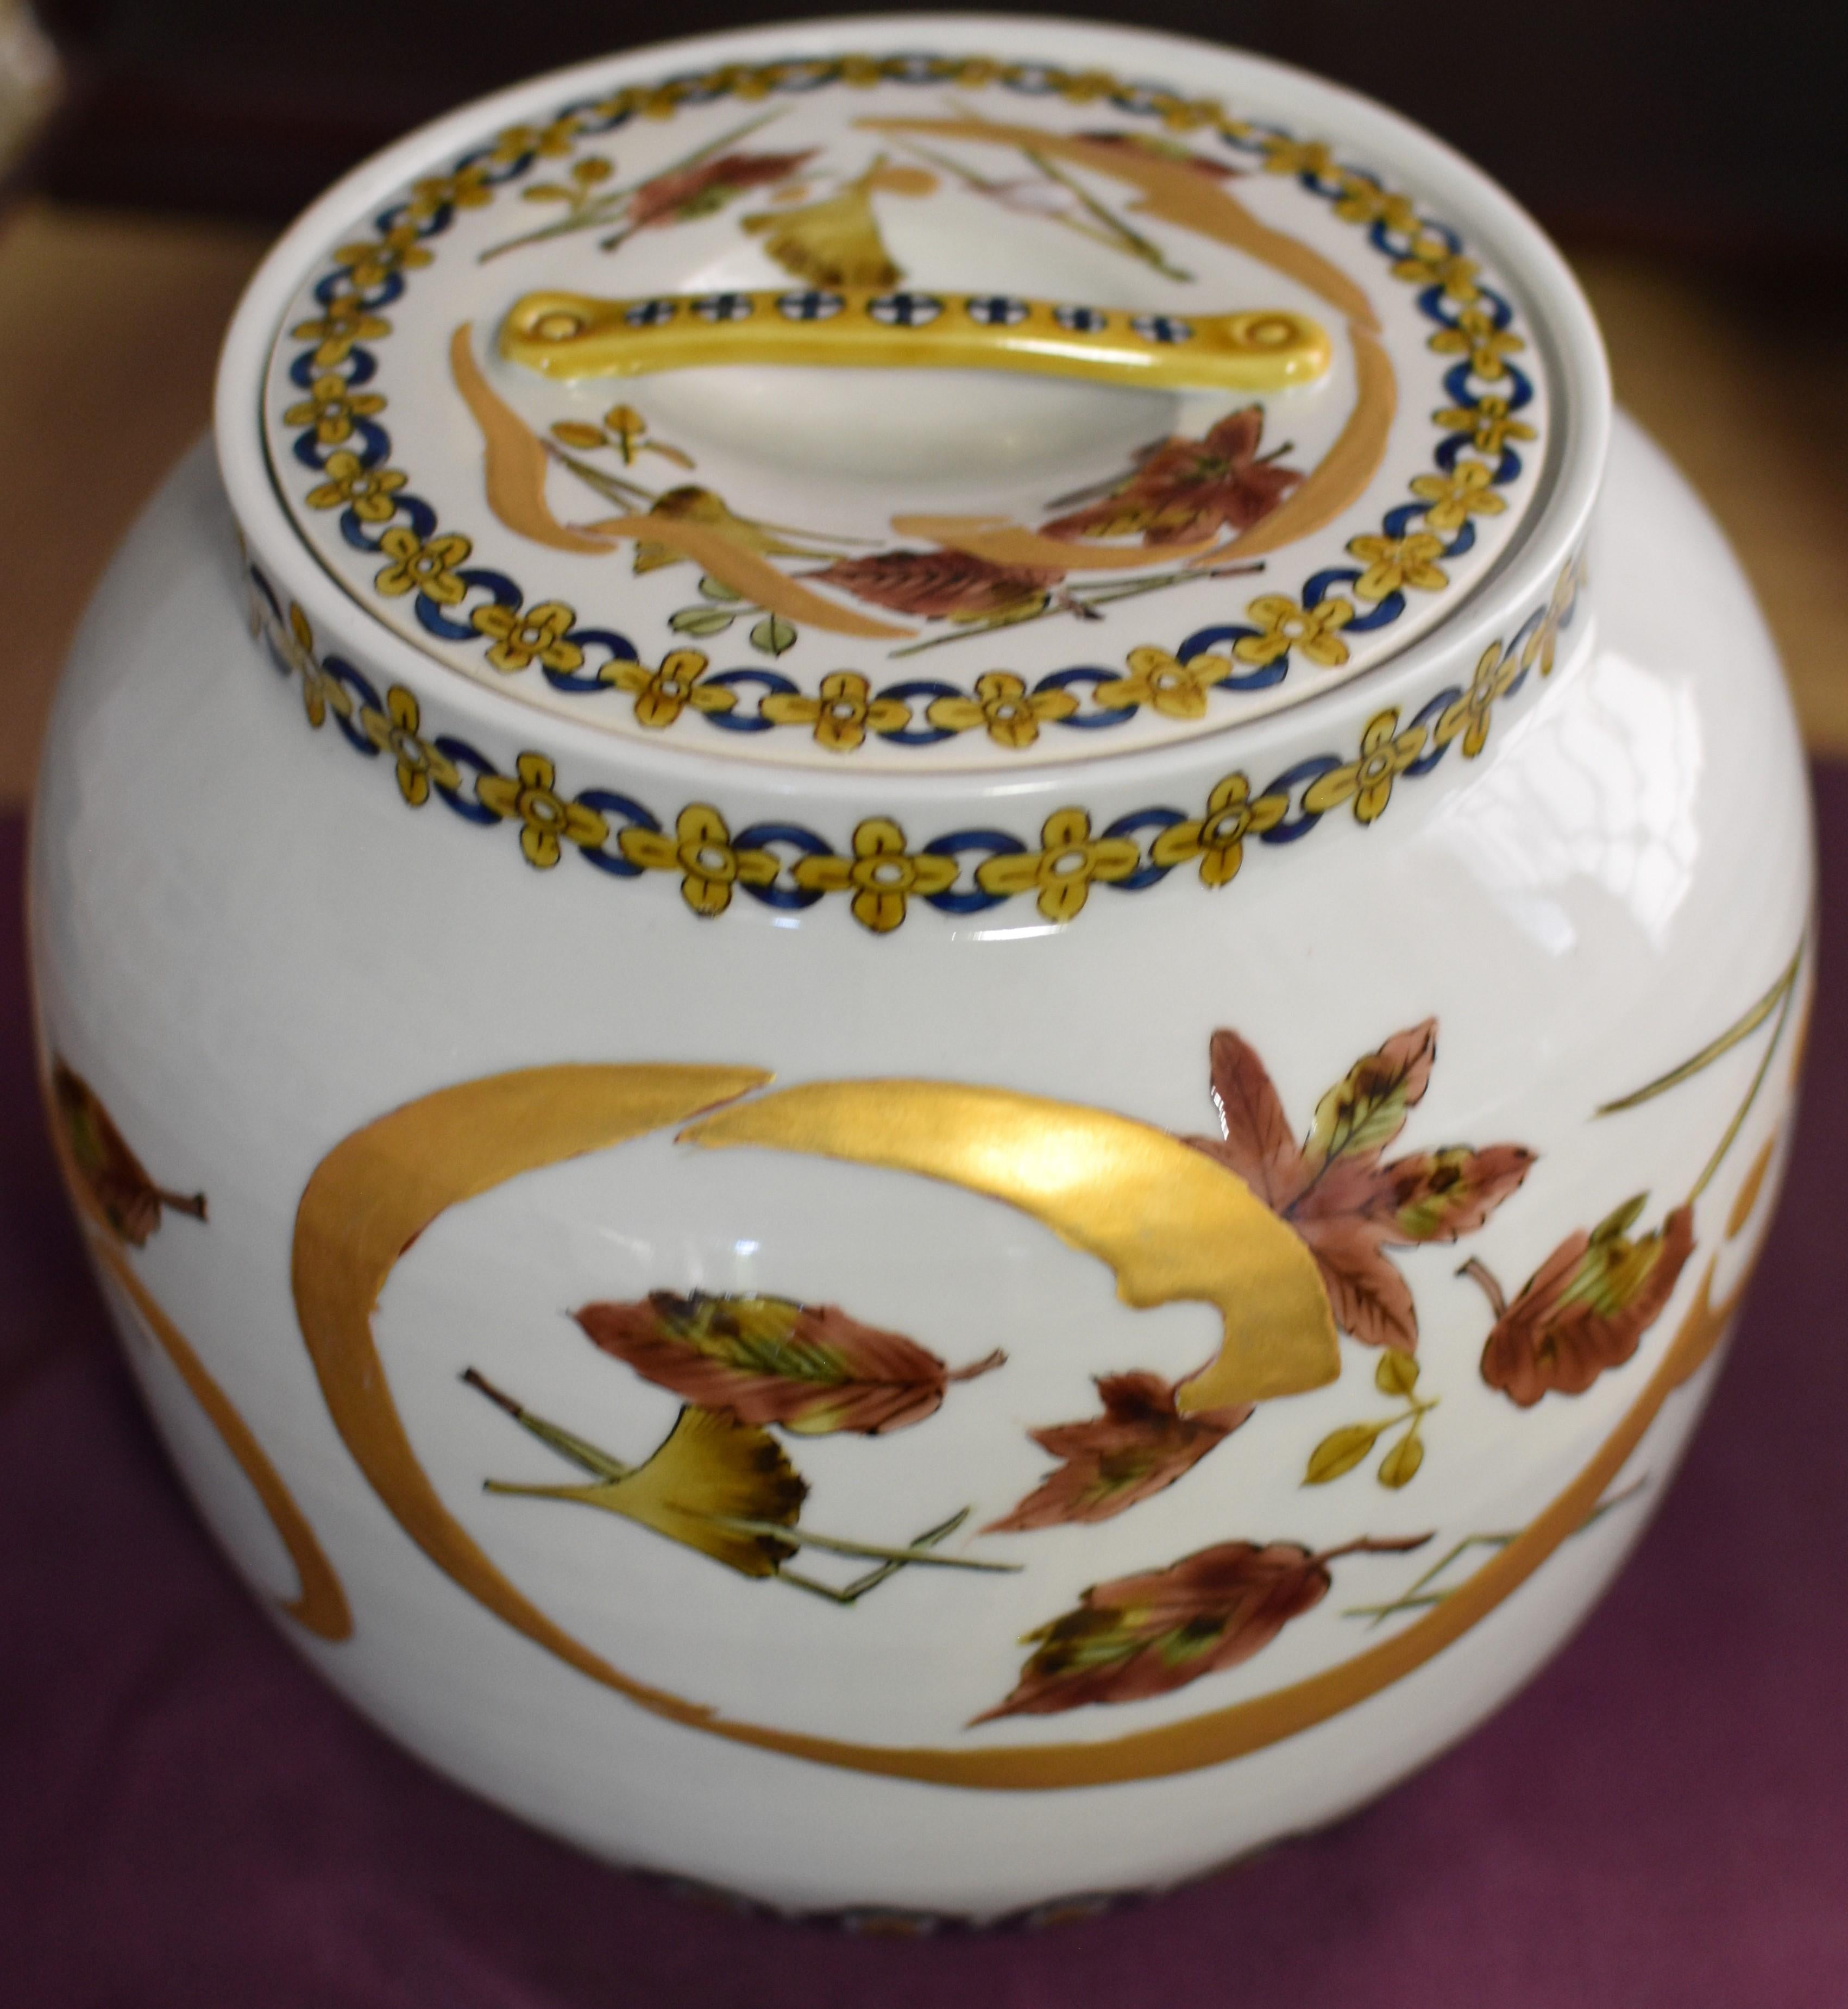 Exquisite Japanese signed and hand painted porcelain mizusashi/Water Jar features an attractive automn scene in warm orange and yellow on a white background and two intricate pattern in yellow and deep blue decorating the rim and base. Gold accents